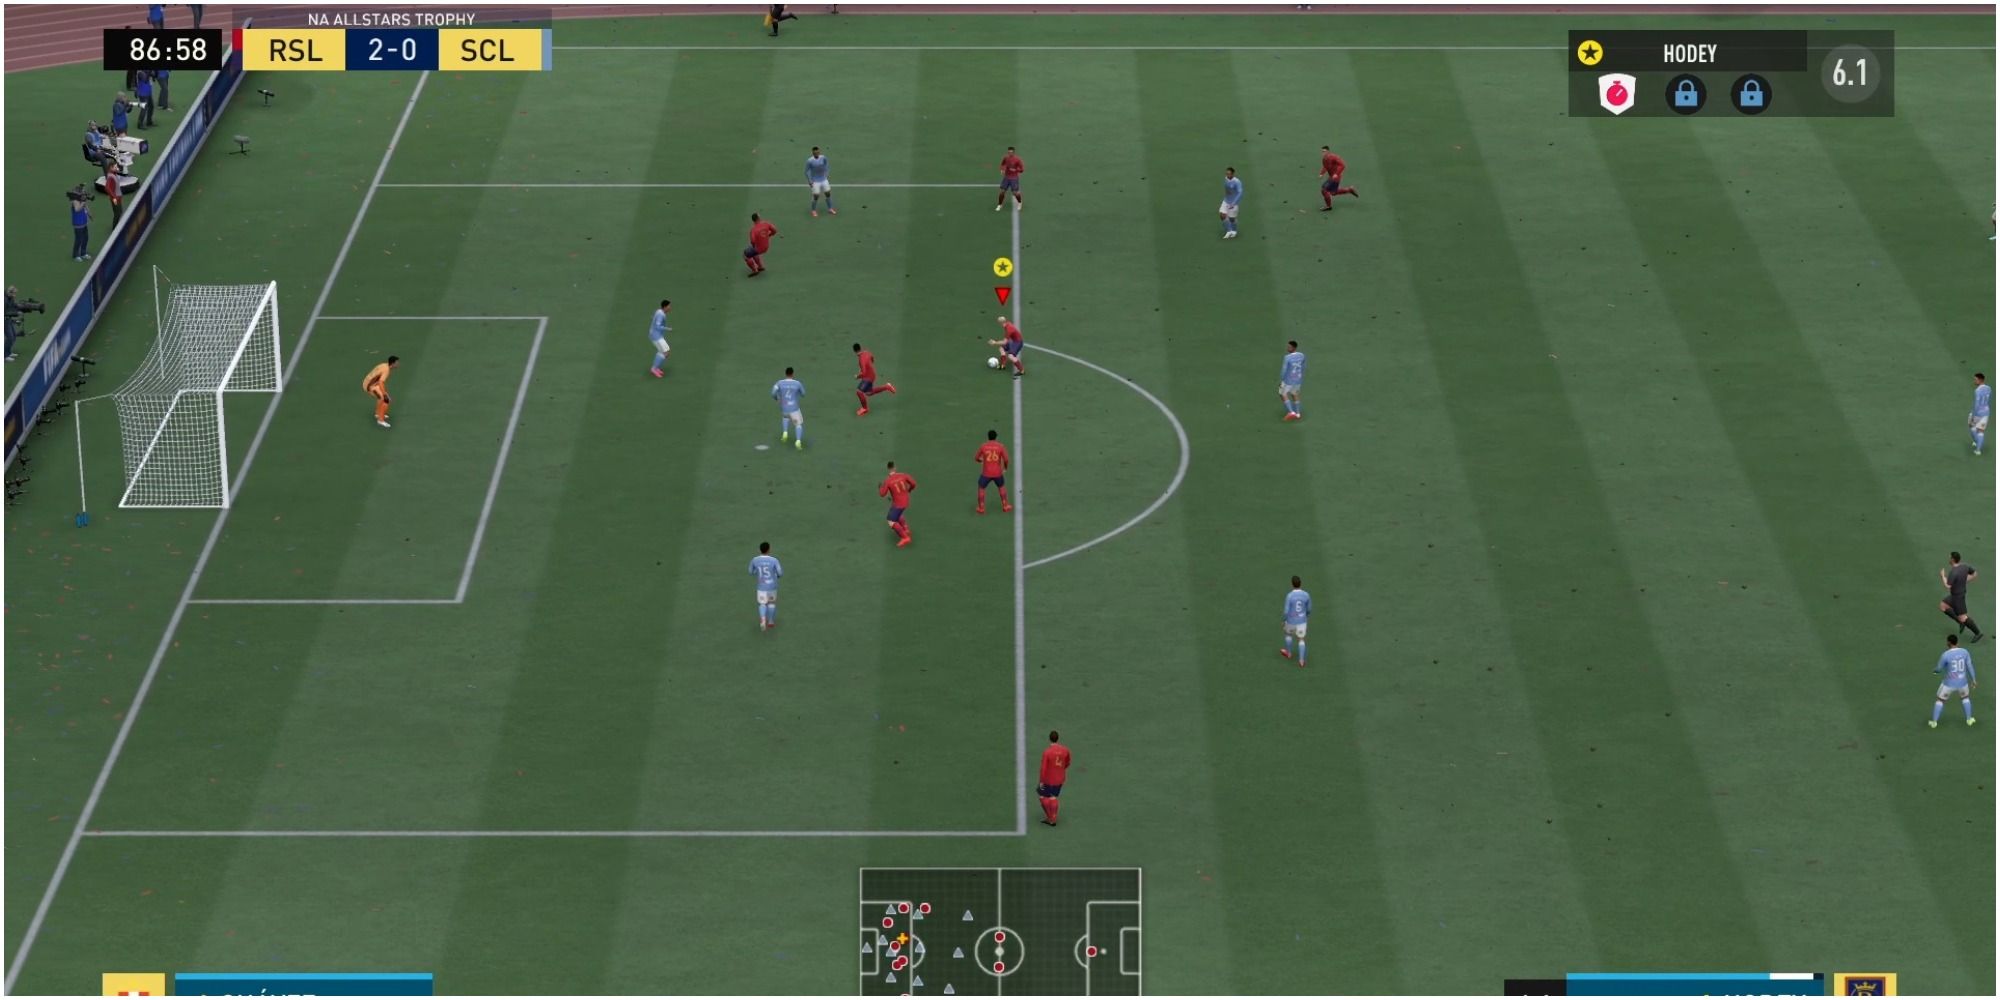 FIFA 22 Situation With Lots Of Good Passing Opportunities